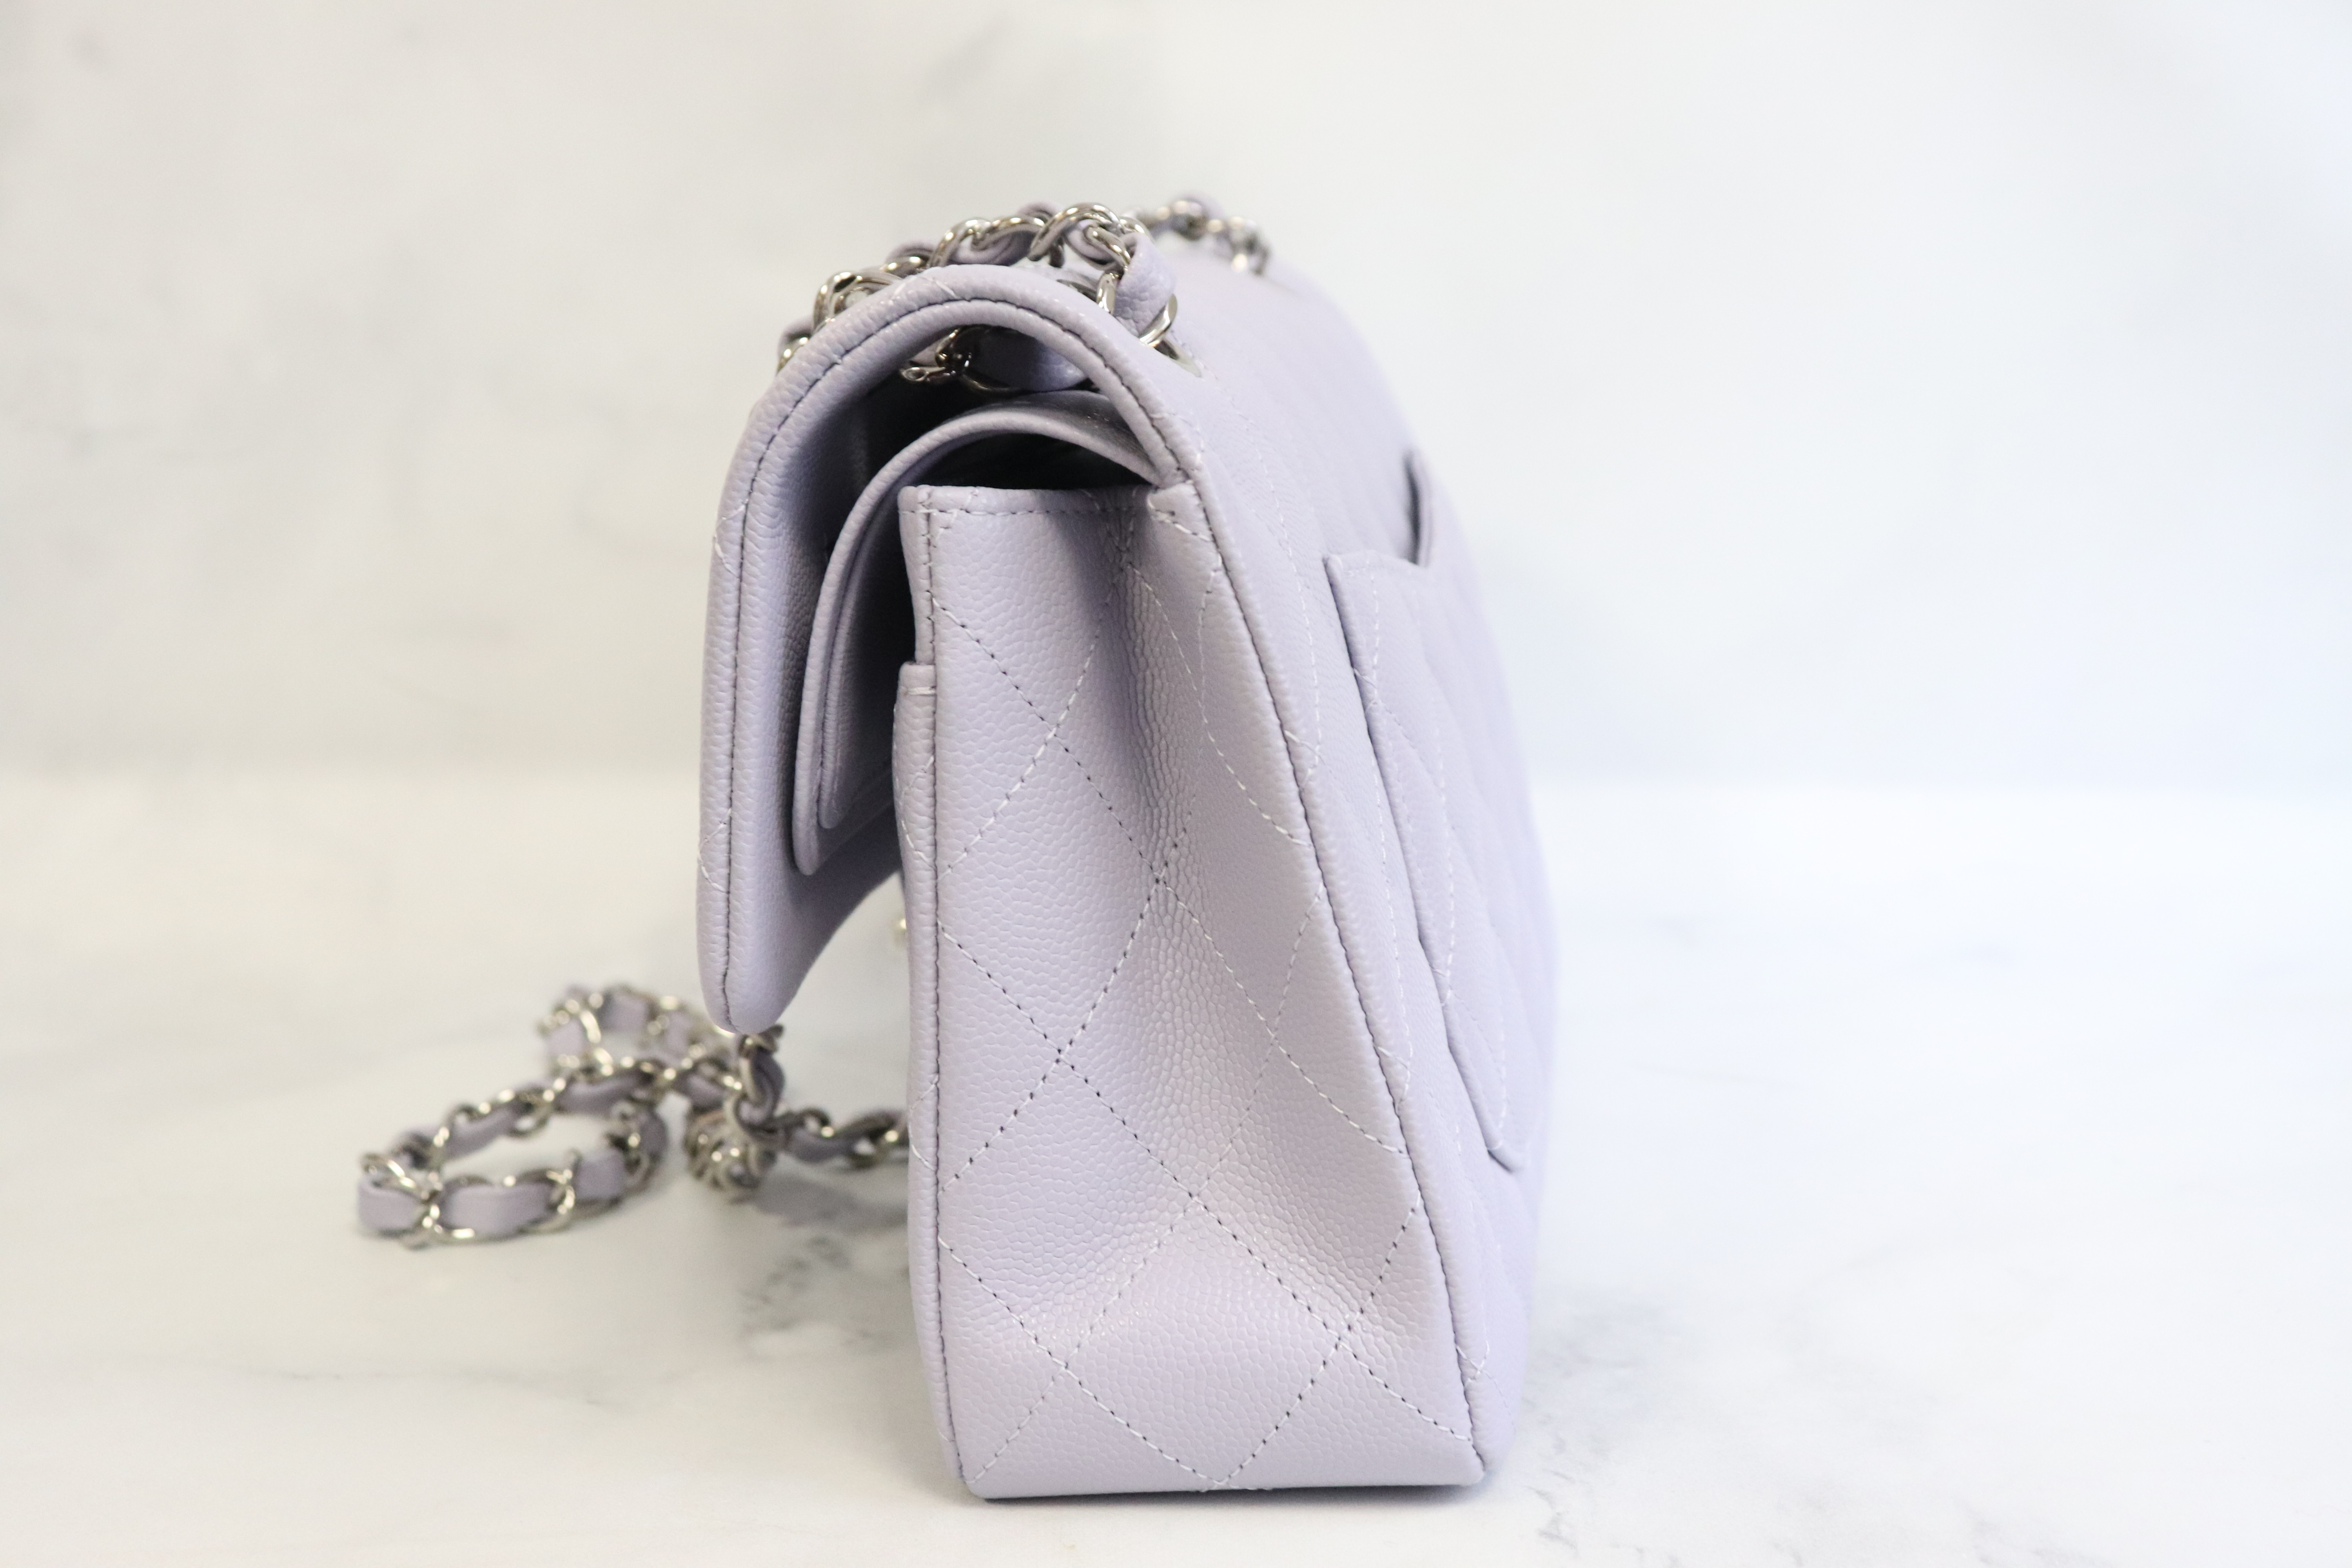 Chanel Classic Small Double Flap, Lilac Caviar Leather, Silver Hardware,  New in Box